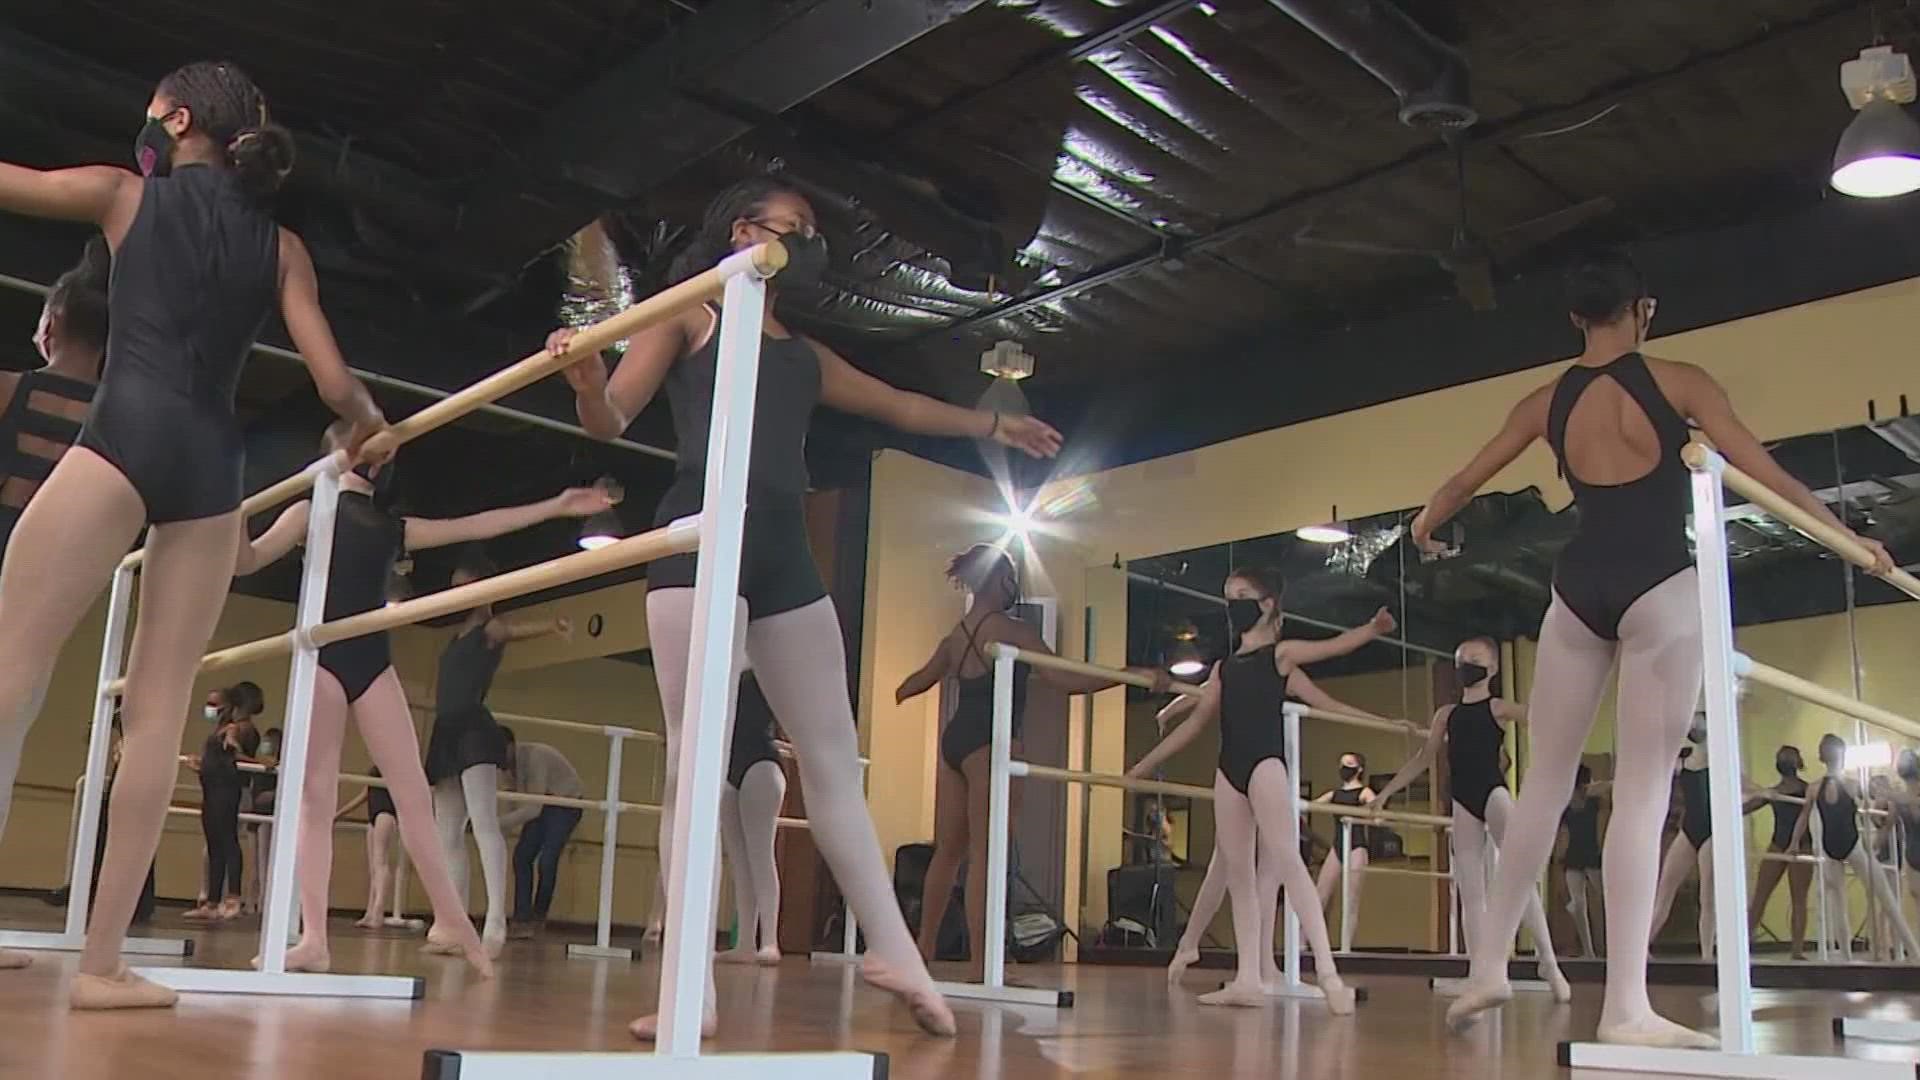 We're taking a look at a powerful partnership between two Houston women. One broke barriers as a ballerina, the other developing programs for aspiring dancers.